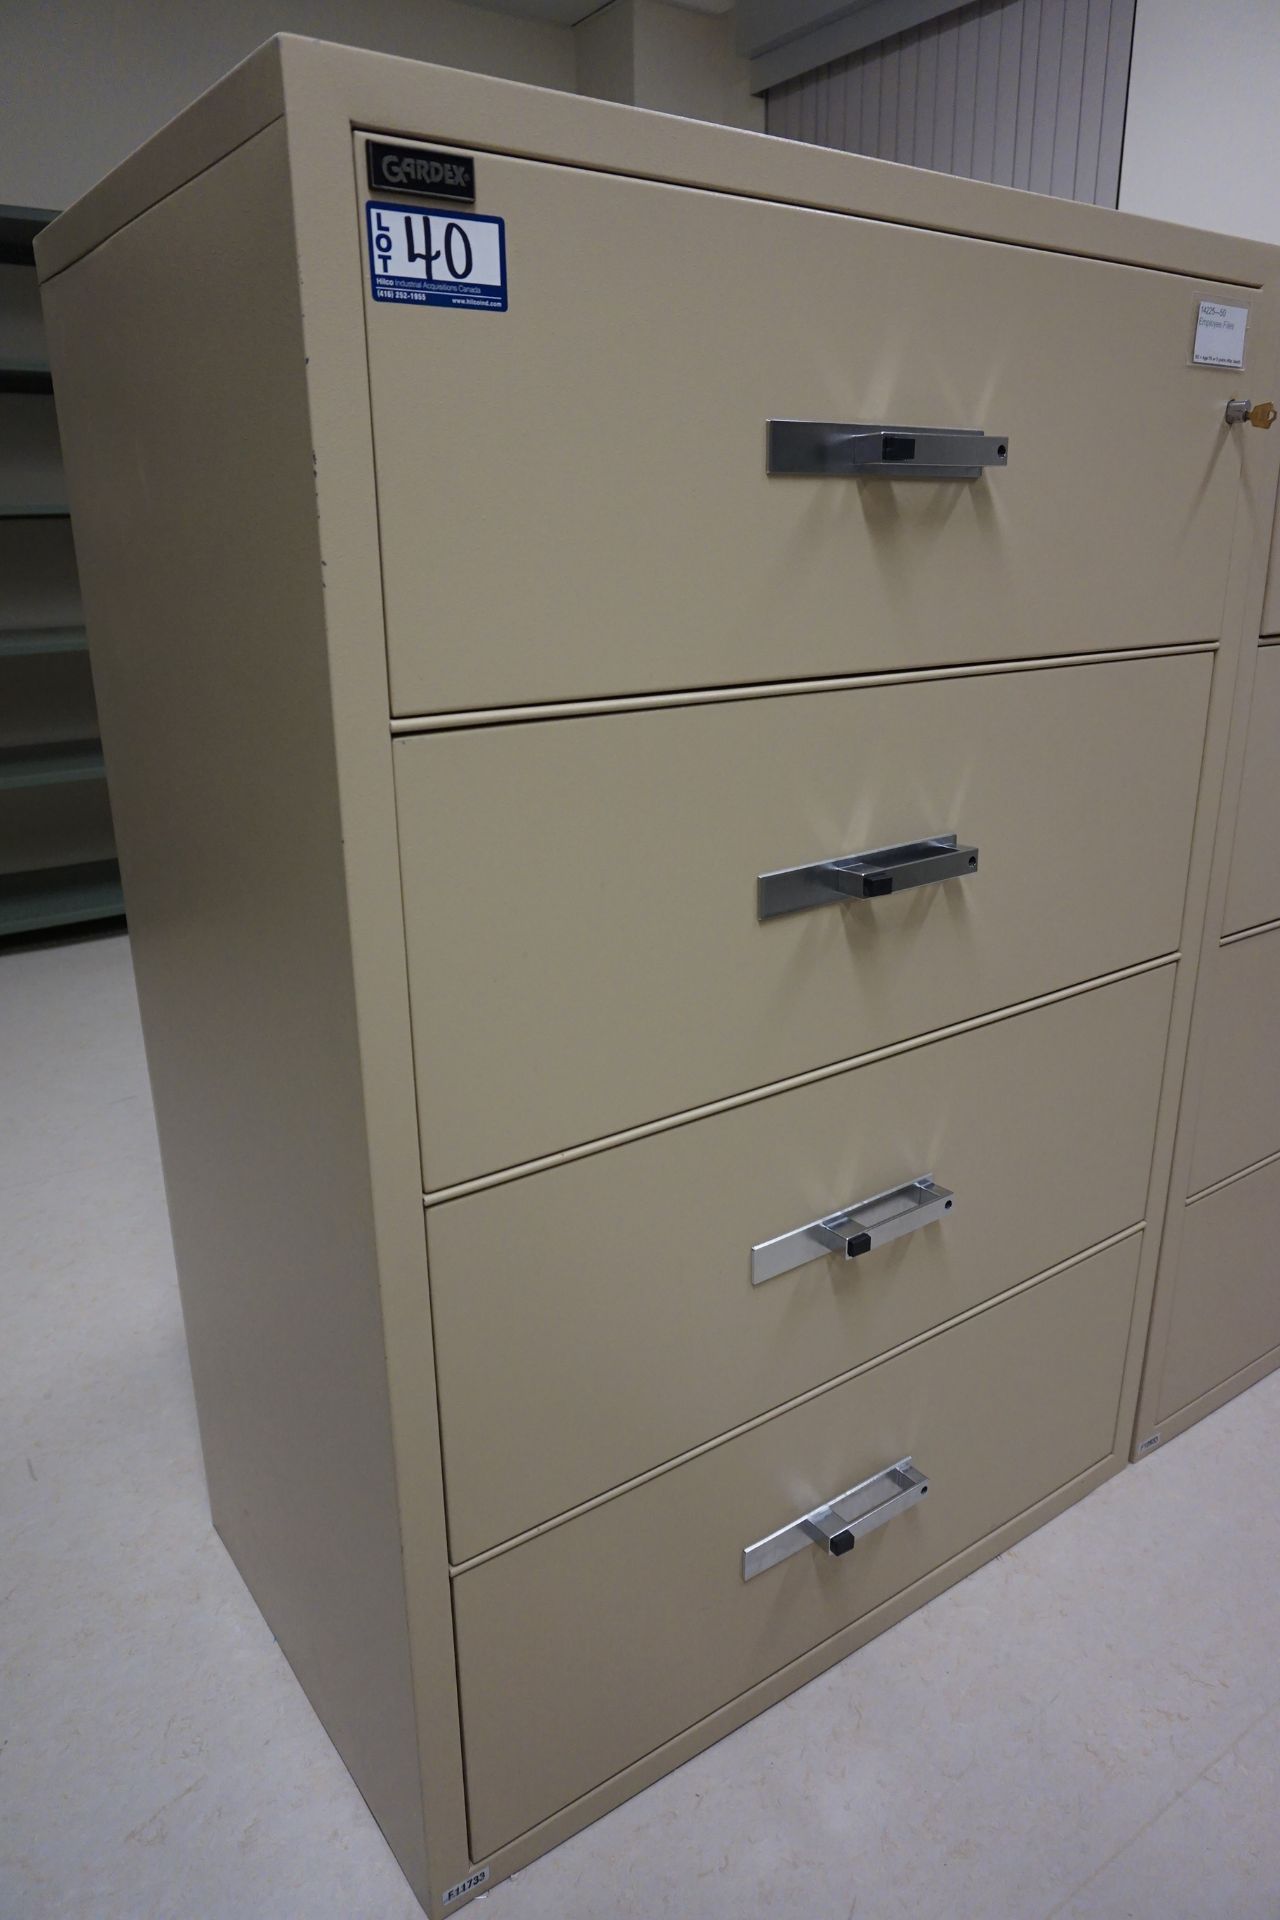 Gardex 4-Drawer Fire Safe Lateral File Cabinet